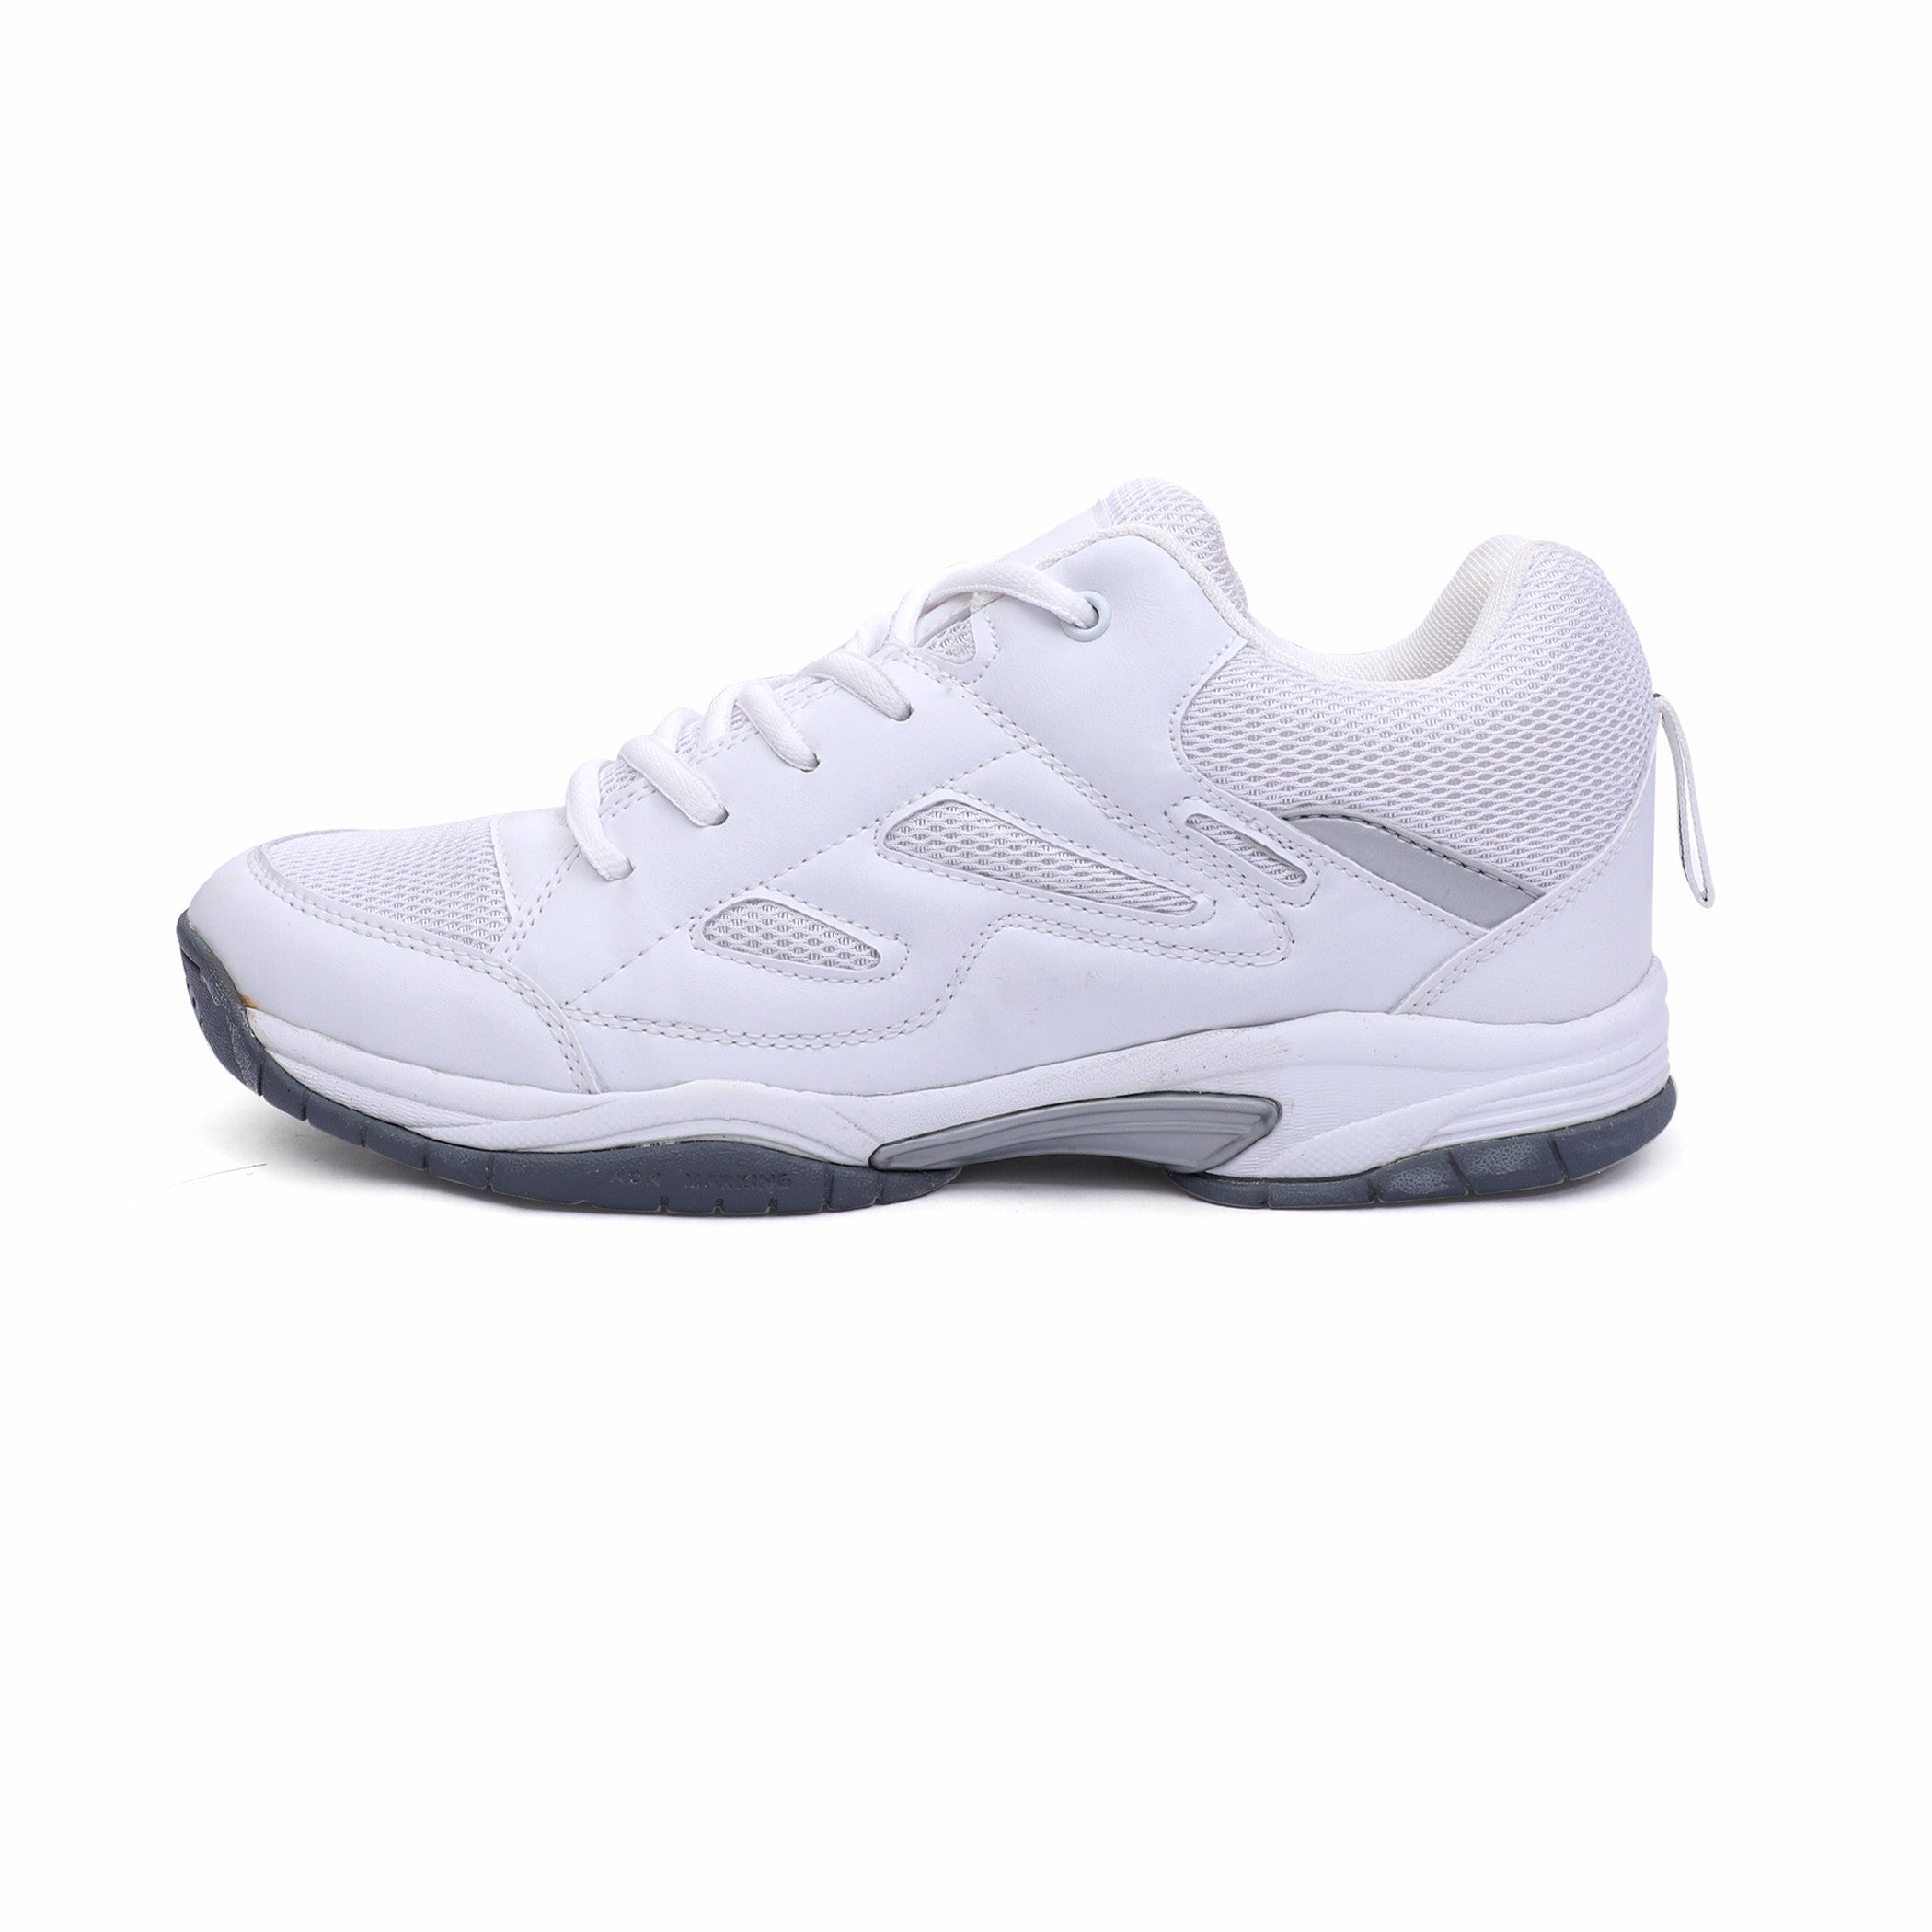 white sports shoes